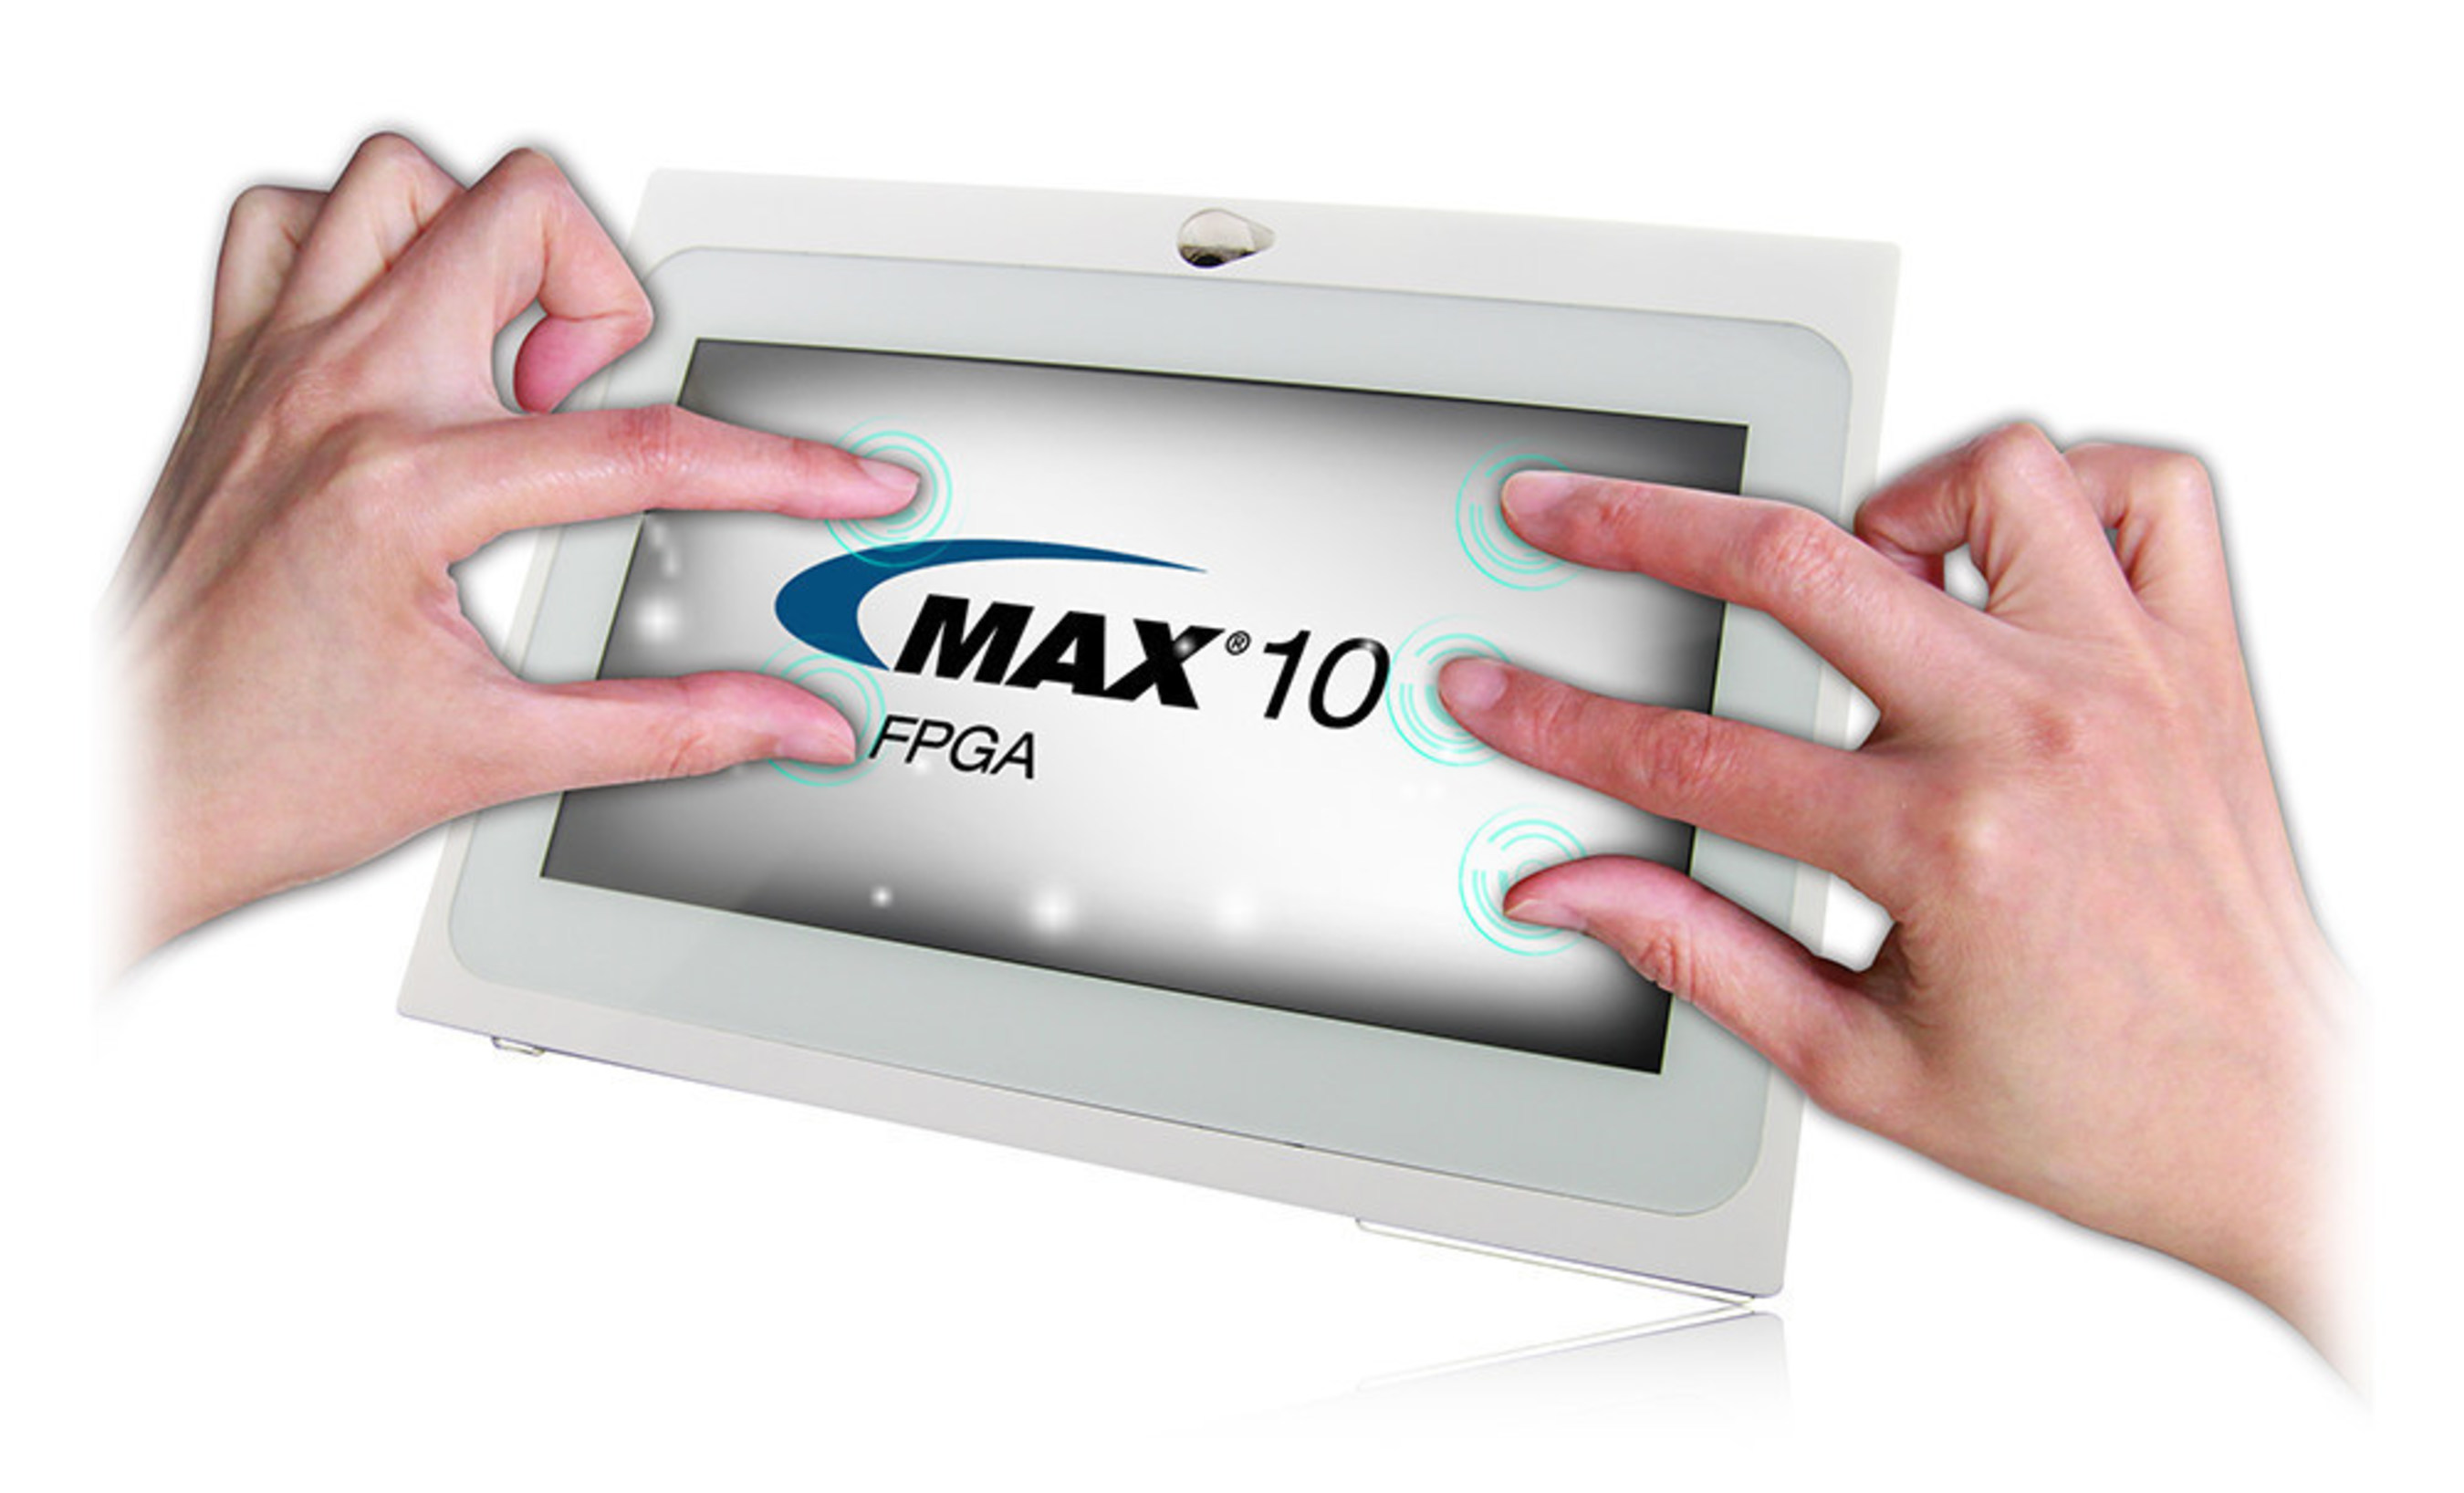 The MAX 10 NEEK simplifies the development of single-chip embedded design in a non-volatile FPGA.